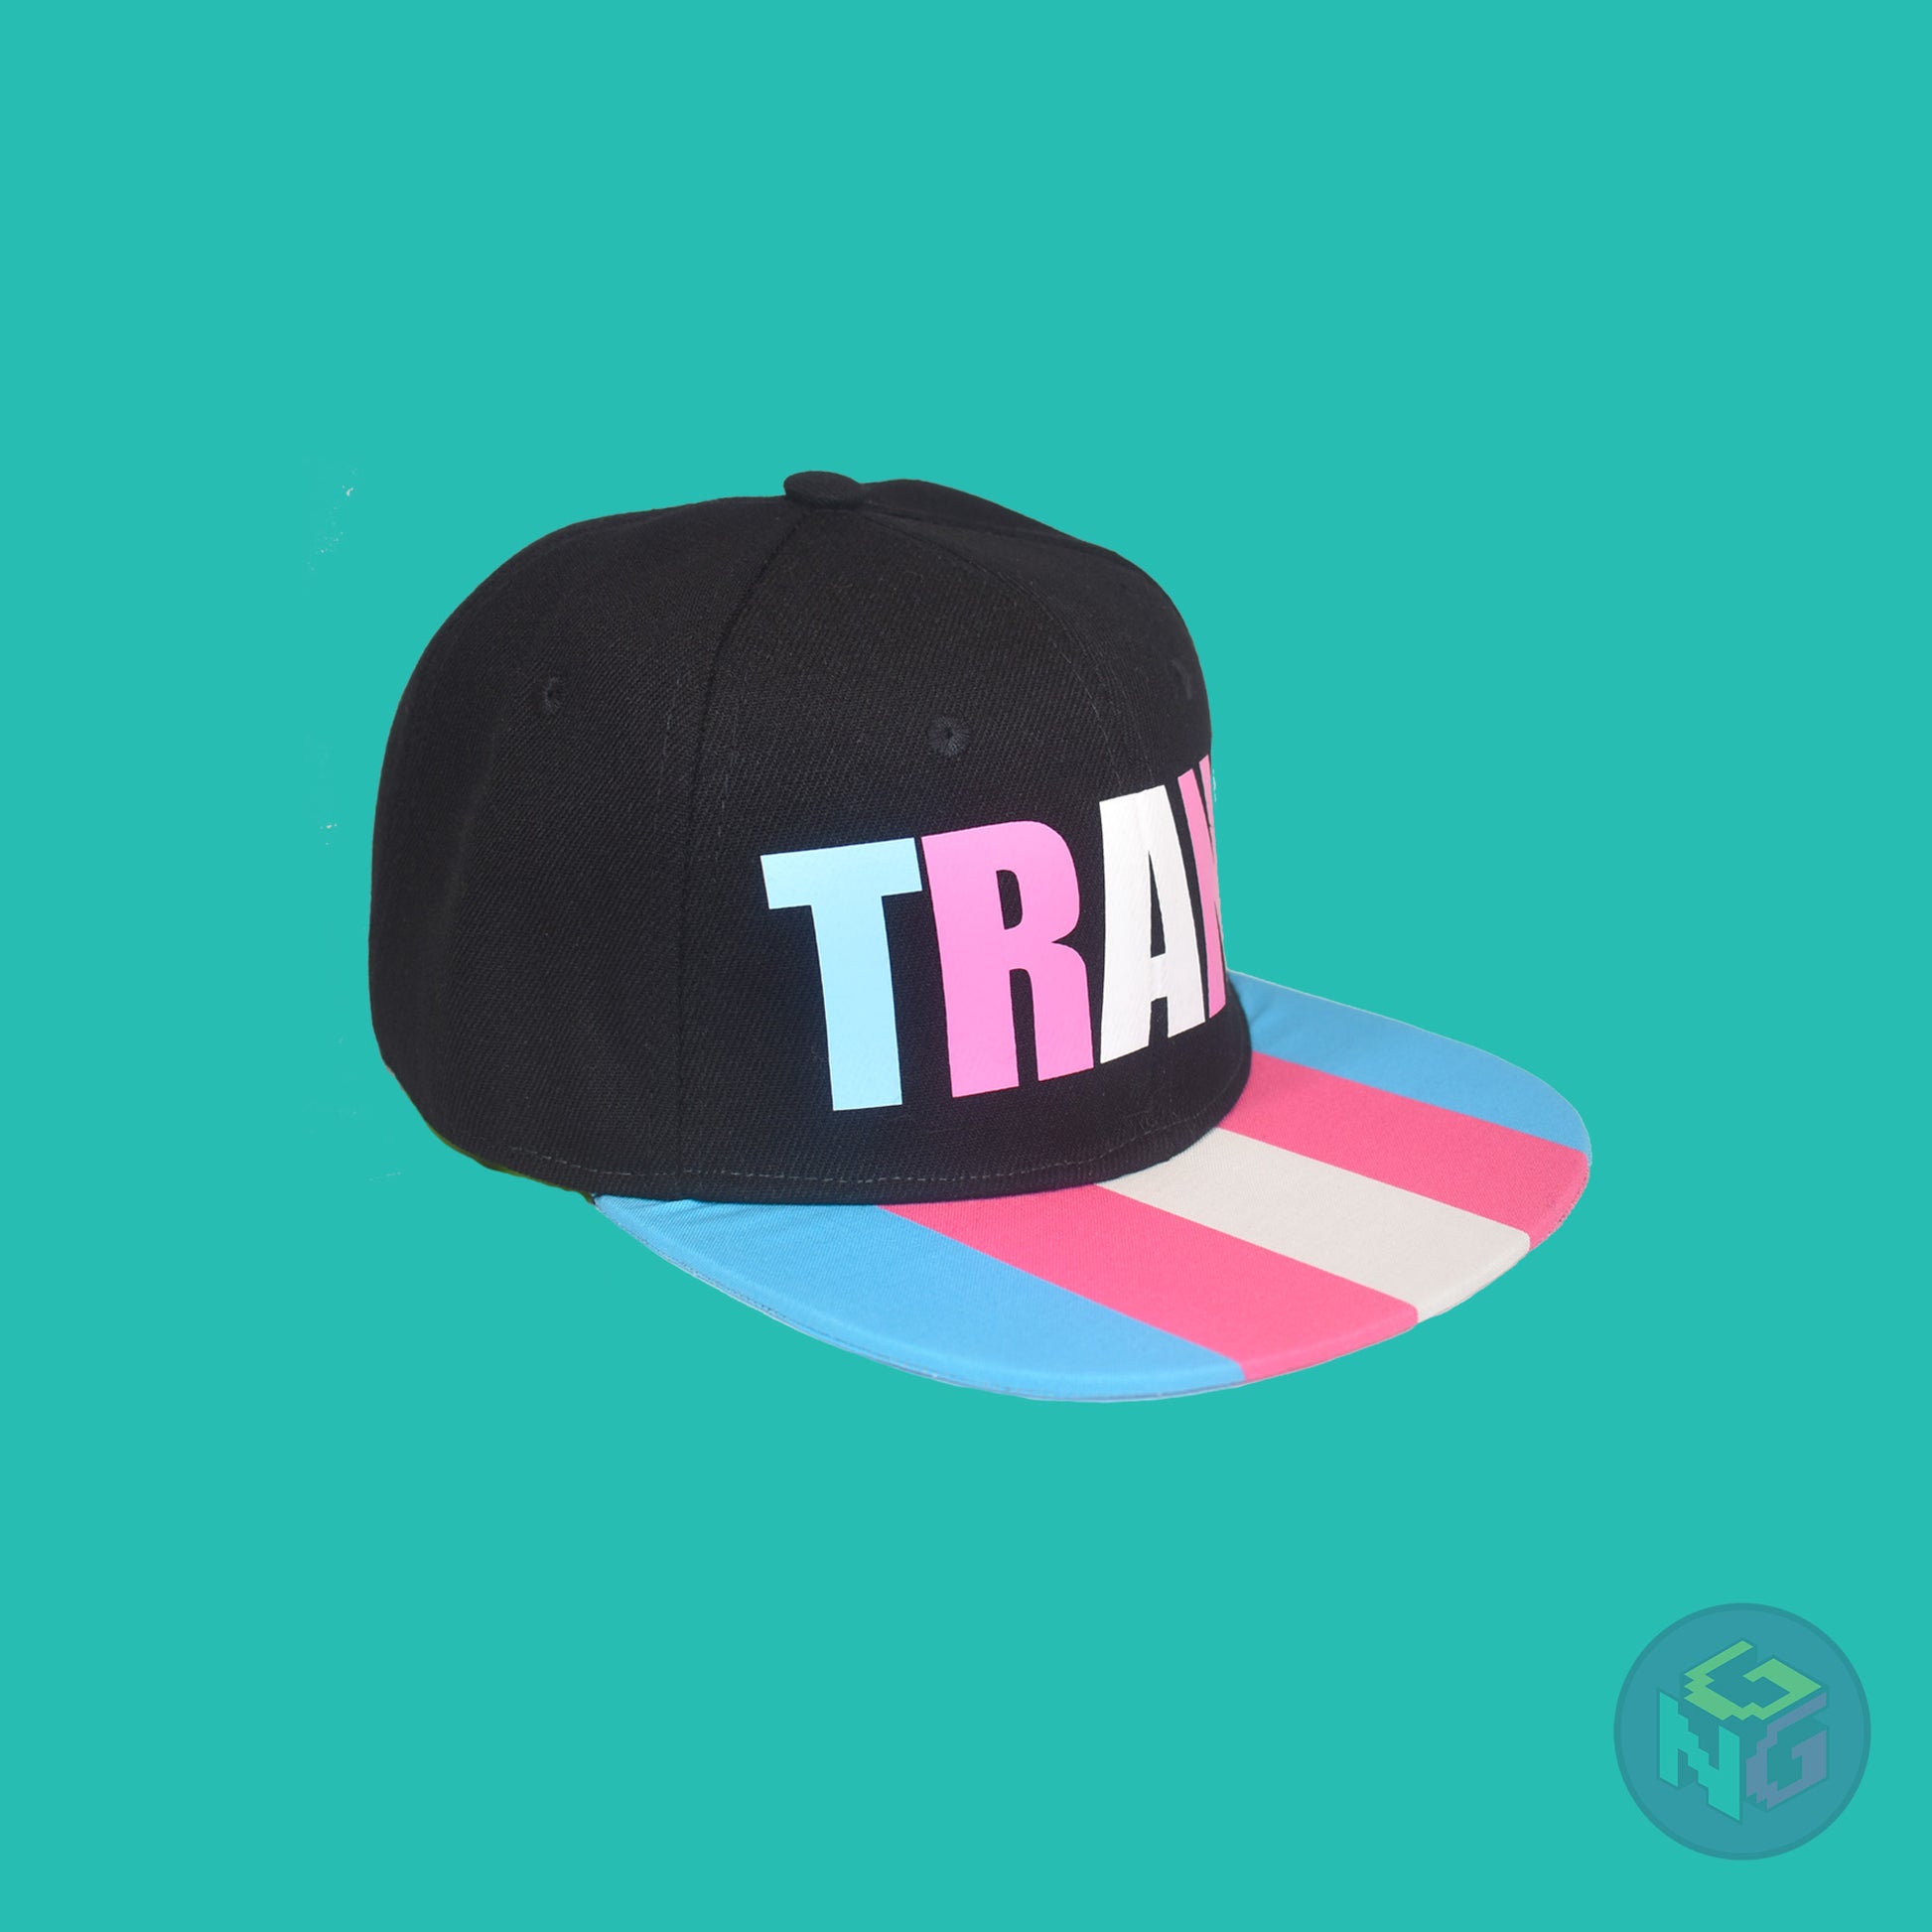 Black flat bill snapback hat. The brim has the transgender pride flag on both sides and the front of the hat has the word “TRANS” in blue, pink, and white letters. Front right view